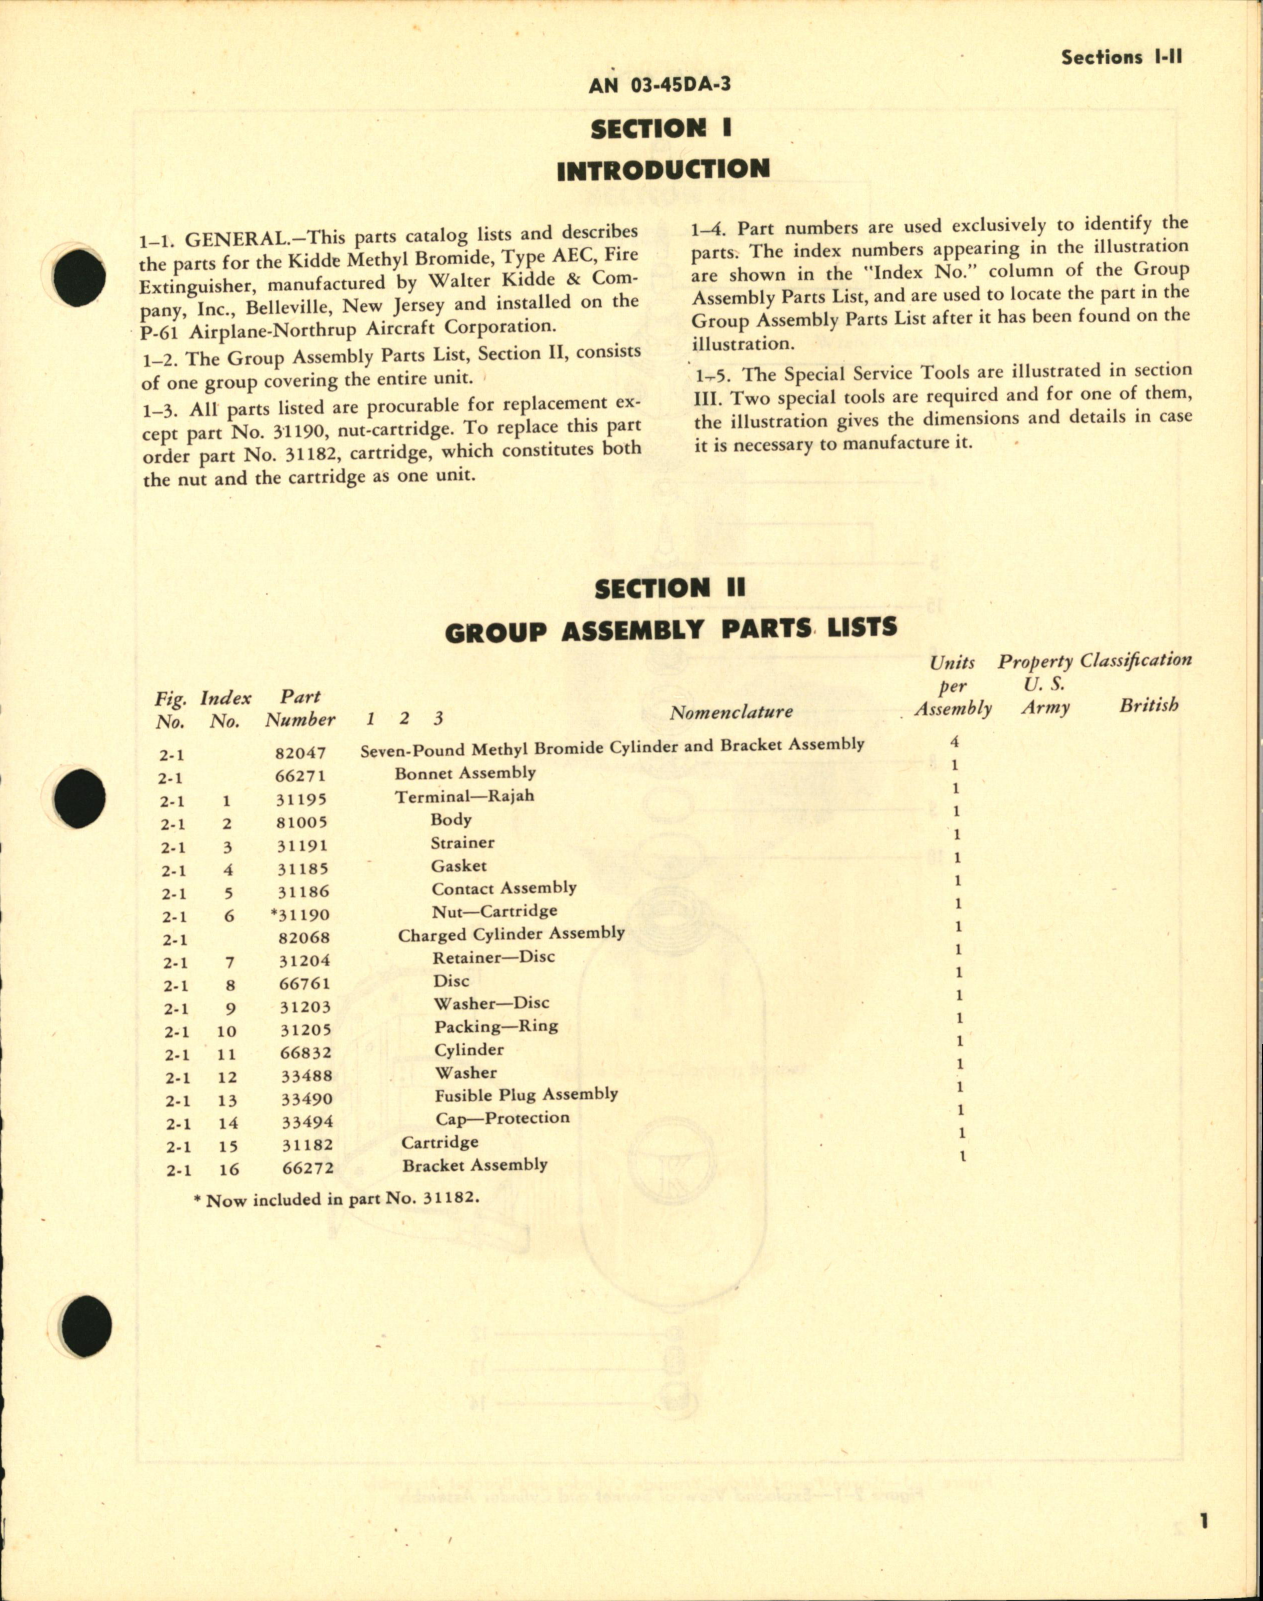 Sample page 5 from AirCorps Library document: Parts Catalog for Methyl Bromide Fire Extinguisher